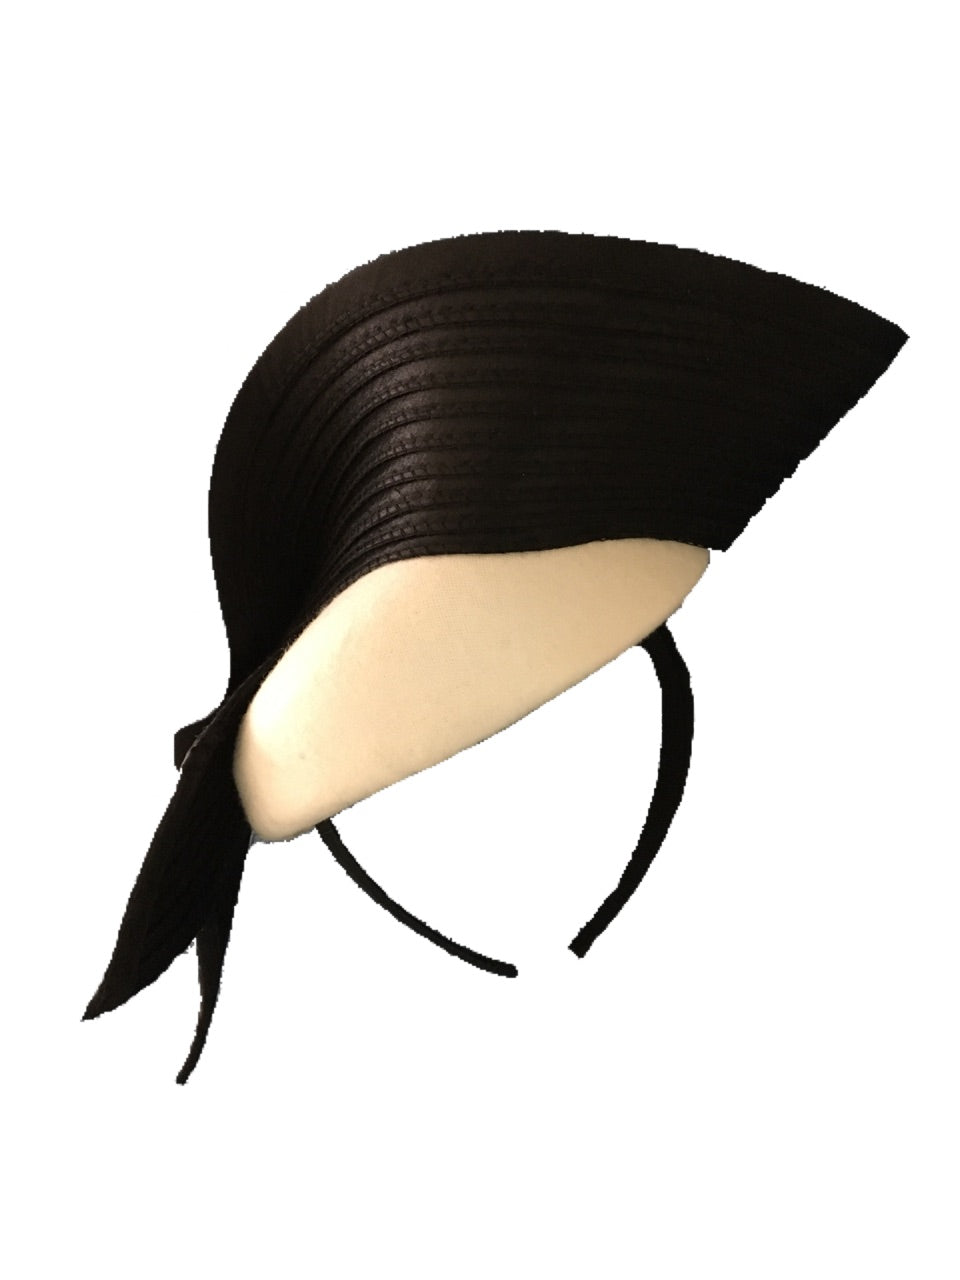 The Fillies Collection White Felt Hat with a Black Structured Fold